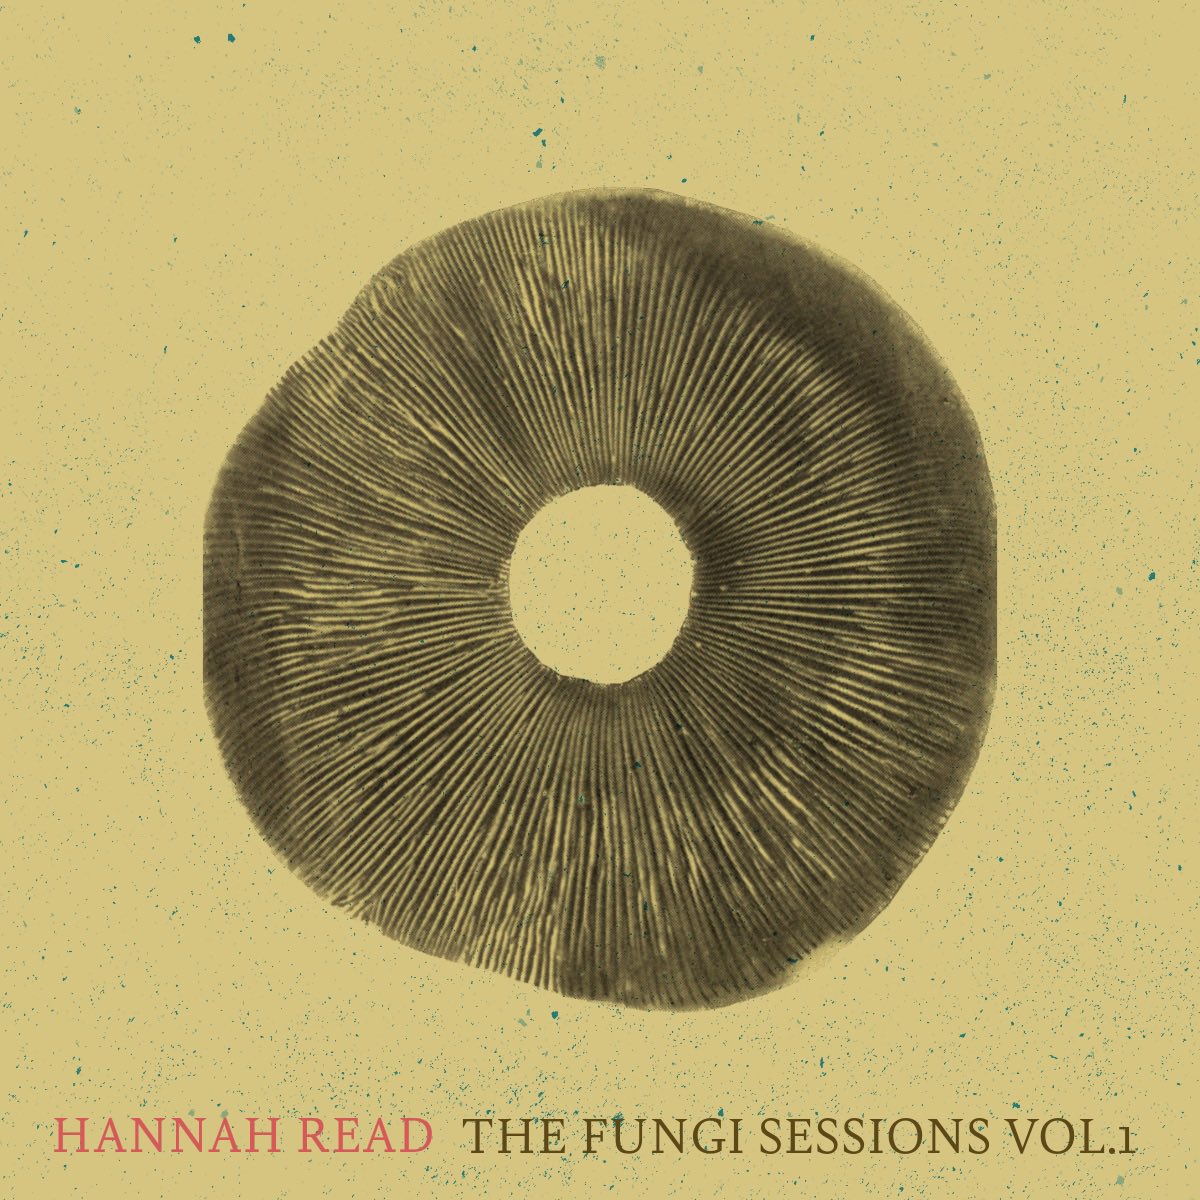 My new album The Fungi Sessions Vol. 1 is out today! I’m so excited to share this with you all 🍄♥️ Visit hannahread.com/the-fungi-sess… for the full backstory + links to listen/buy. Thank you and I hope you enjoy X